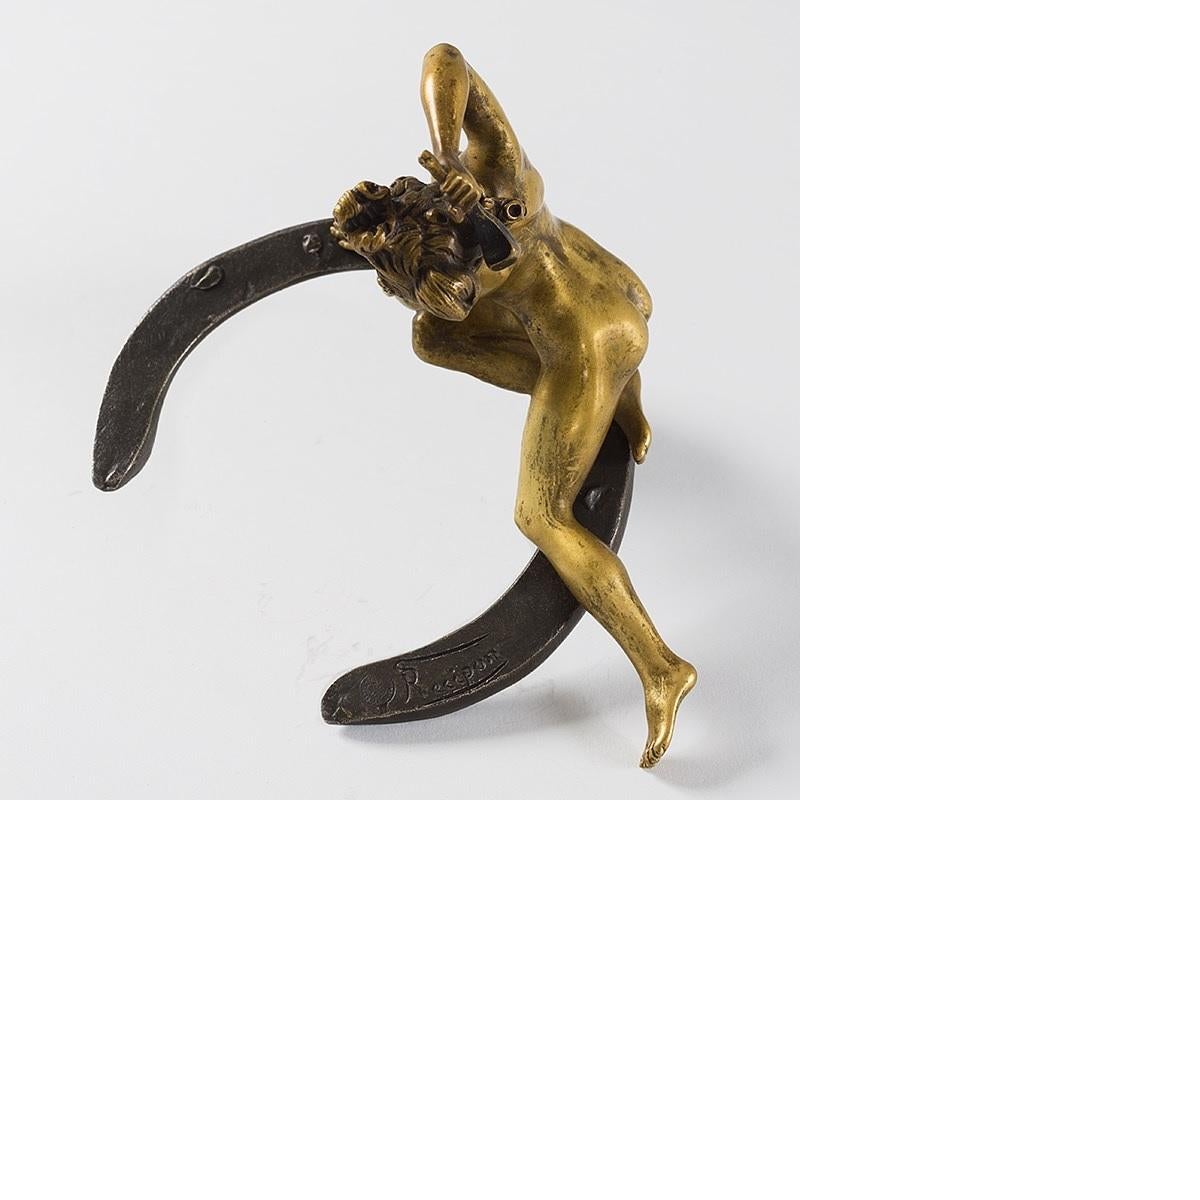 Early 20th Century French Art Nouveau Gilt Bronze Desk Weight by Georges Recipon